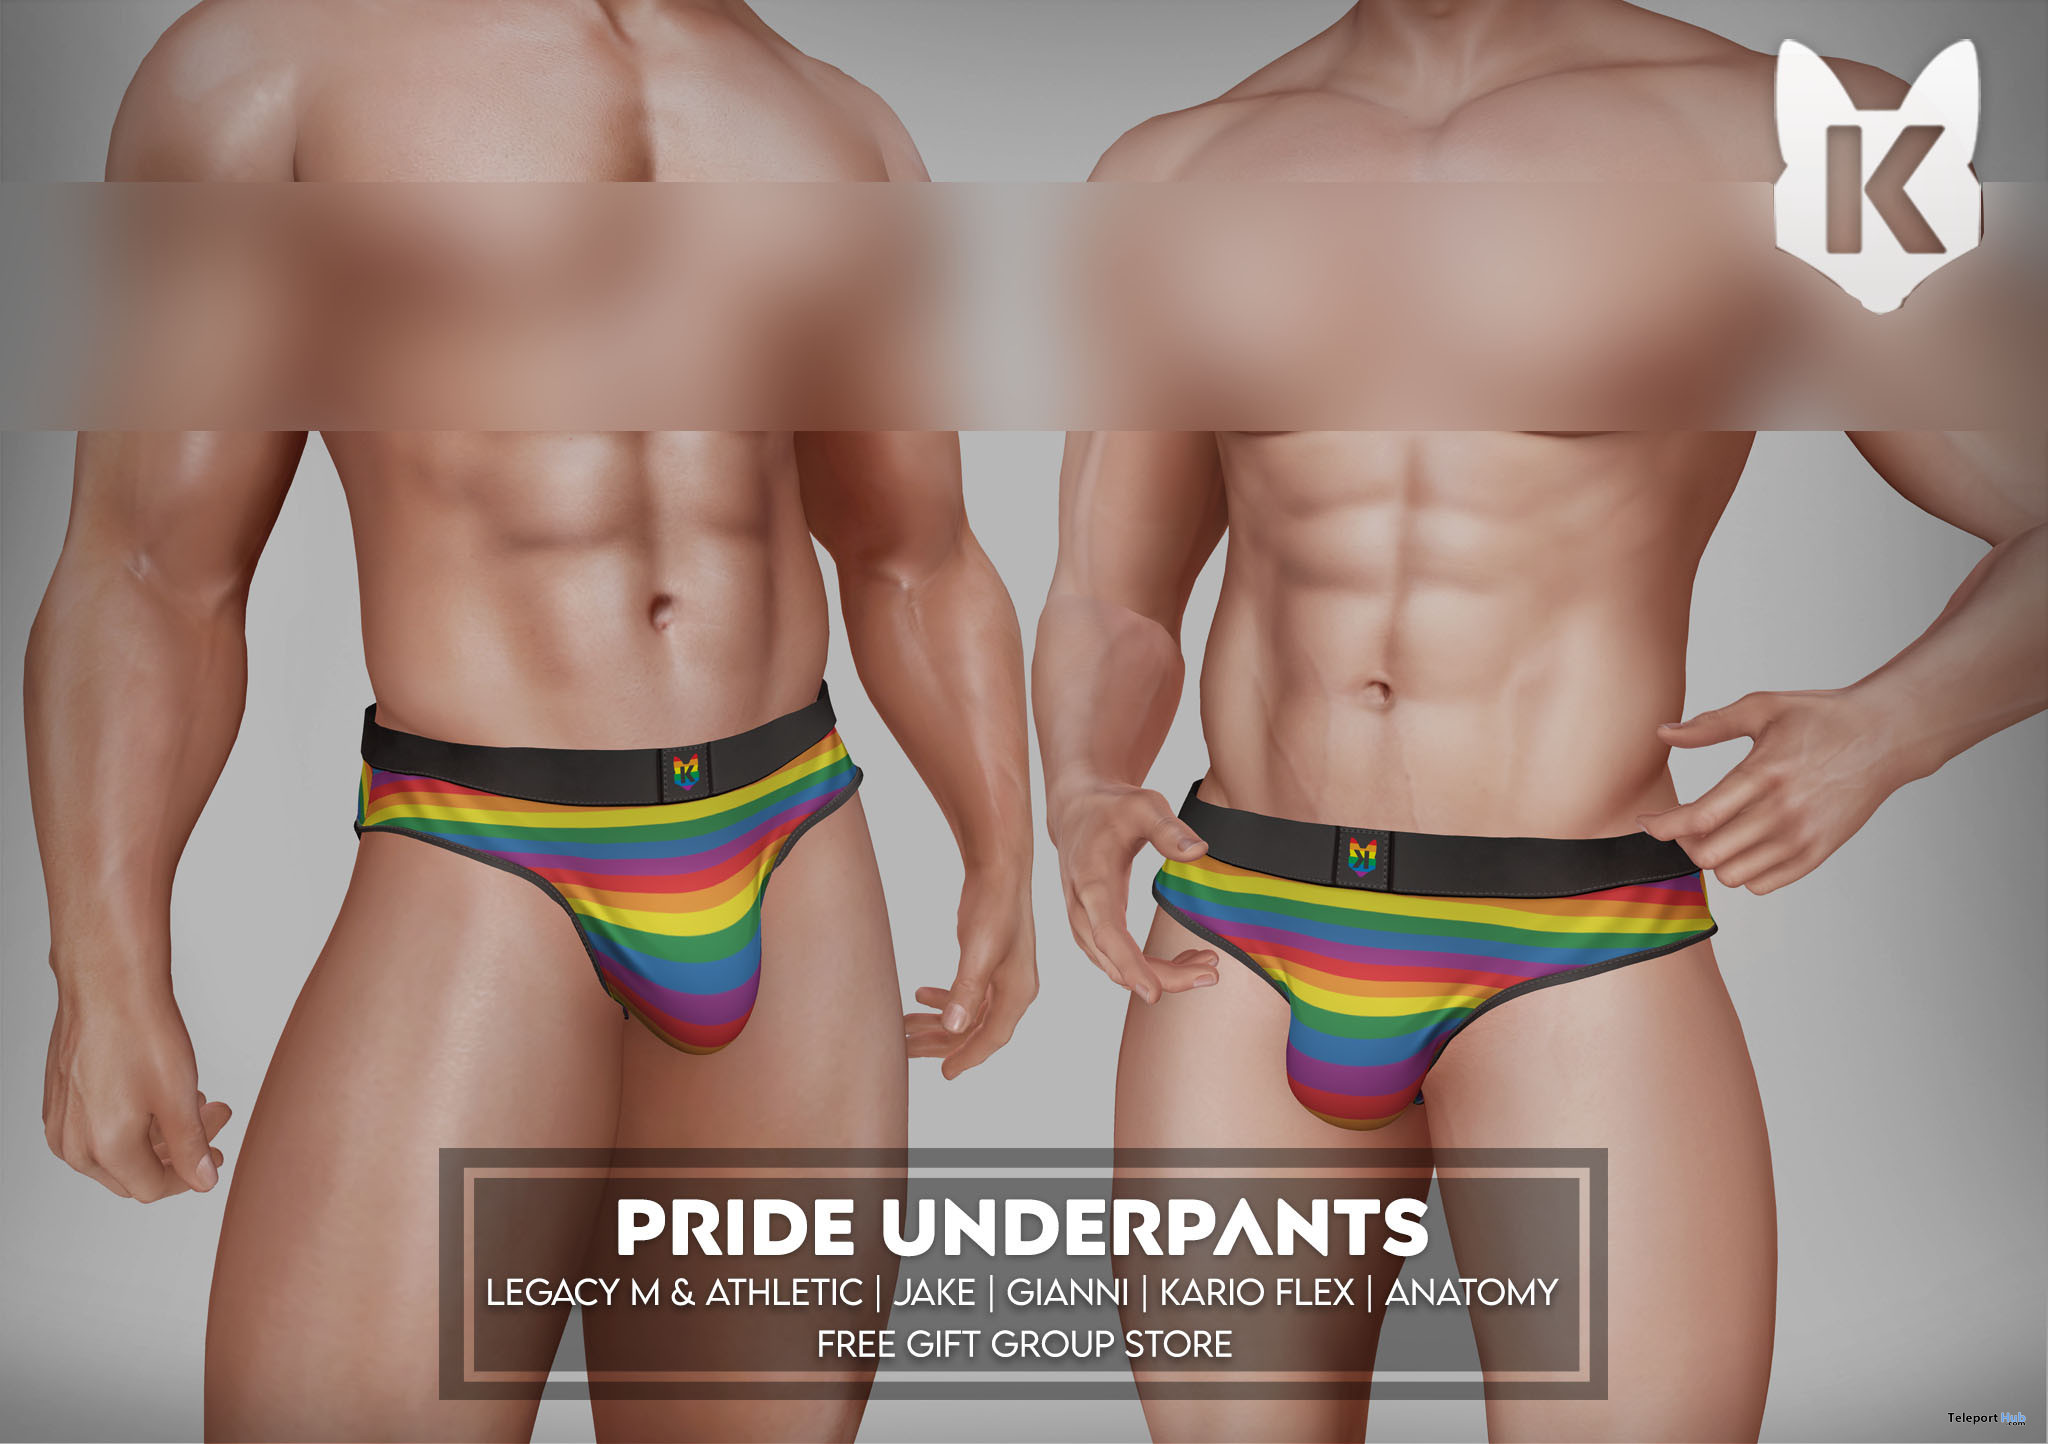 Pride Underpants June 2023 Group Gift by KINDEX - Teleport Hub - teleporthub.com